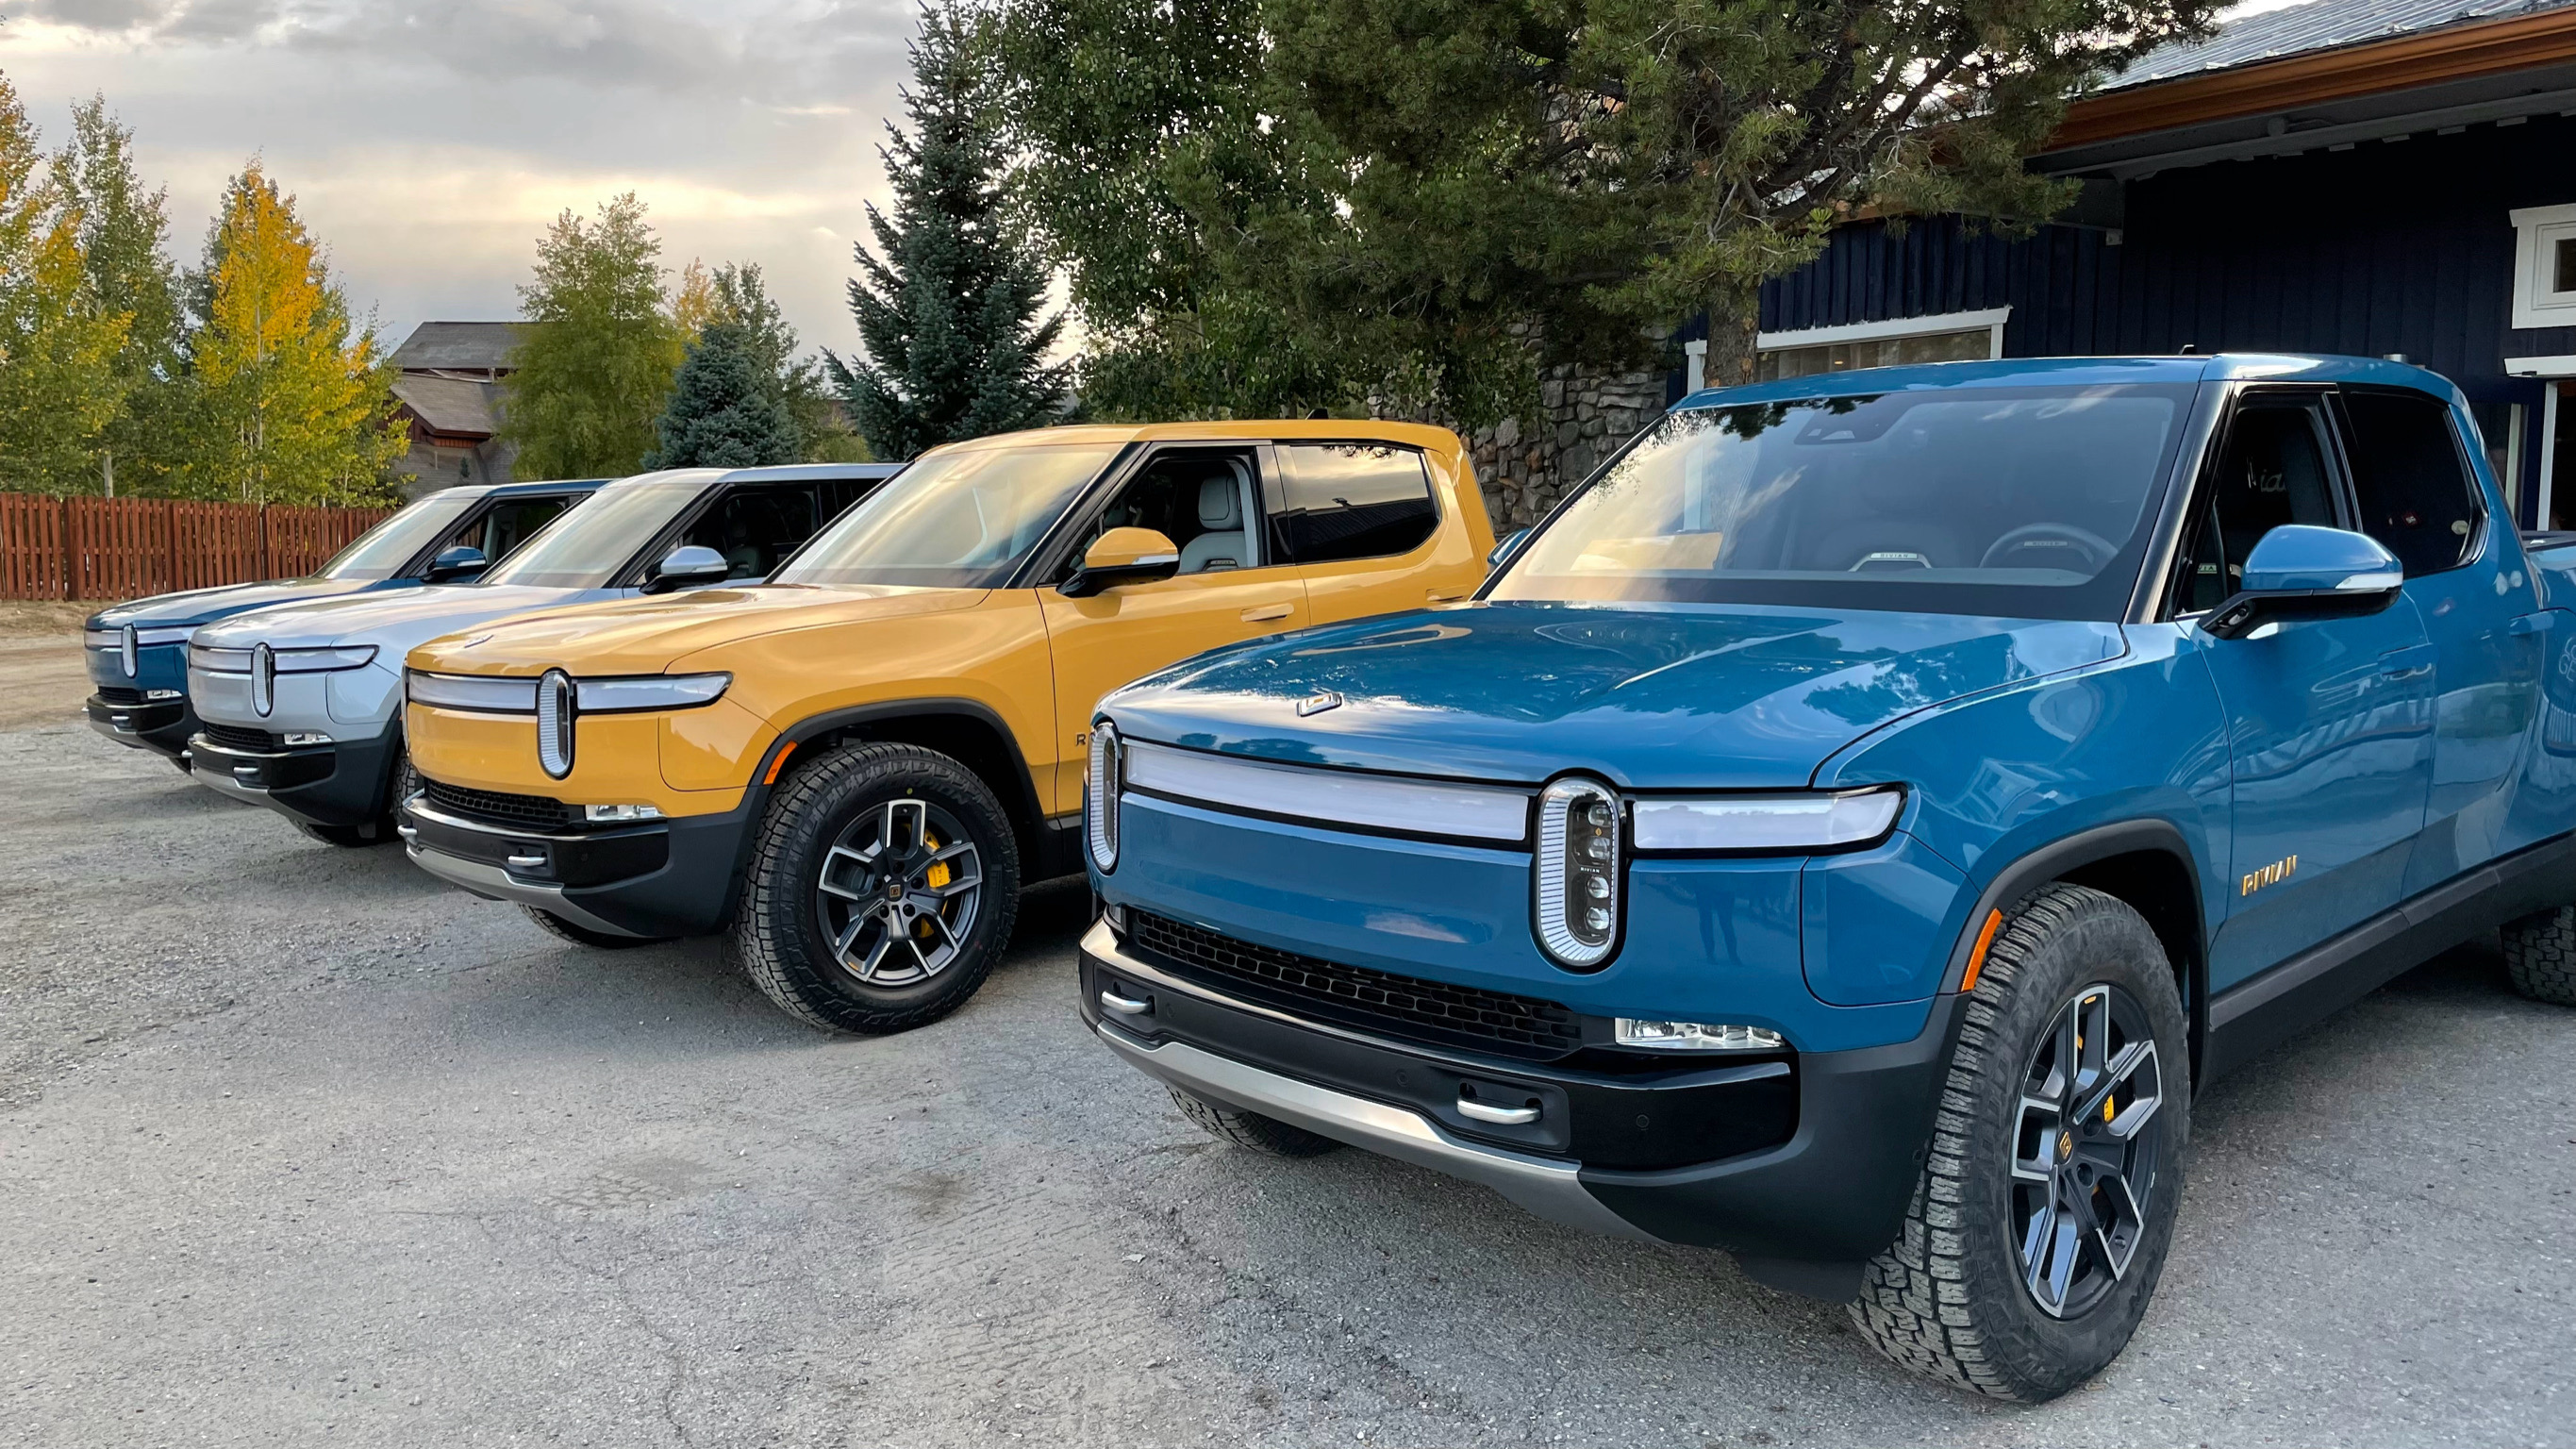 Rivian Announces Pricing and Product Updates for the R1S Electric SUV